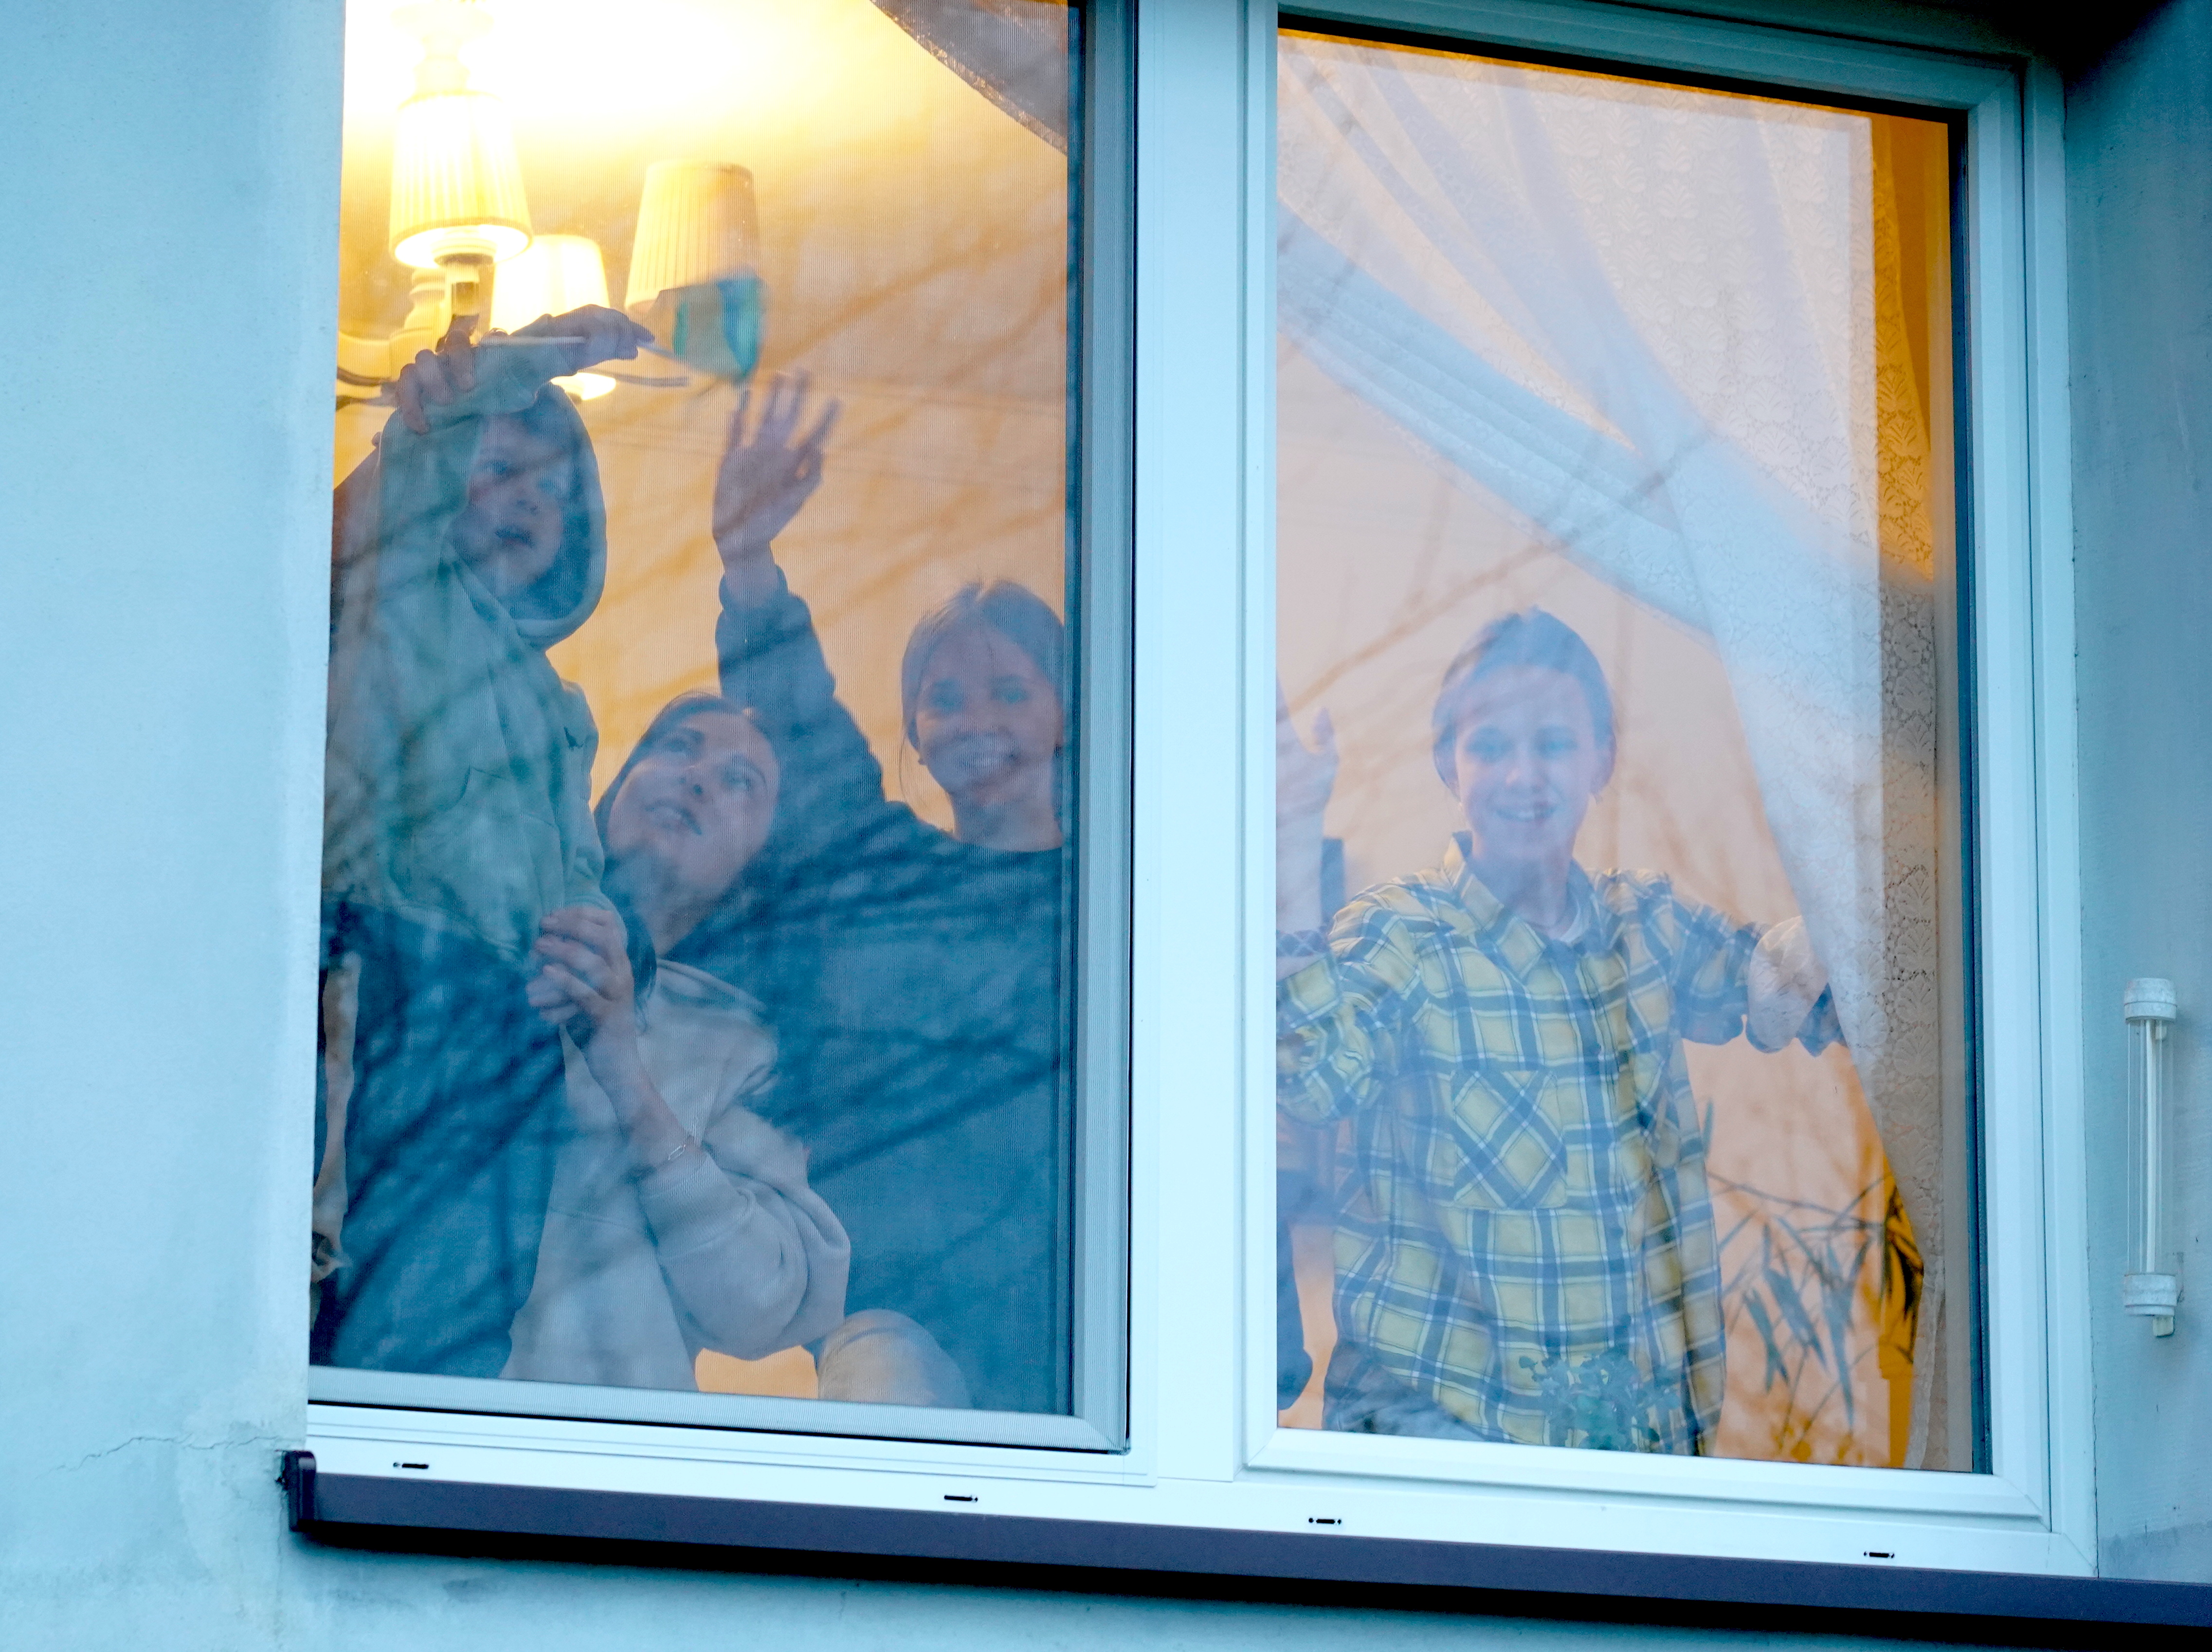 Ukrainian refugees waving from a window of the Polish house where they were welcomed